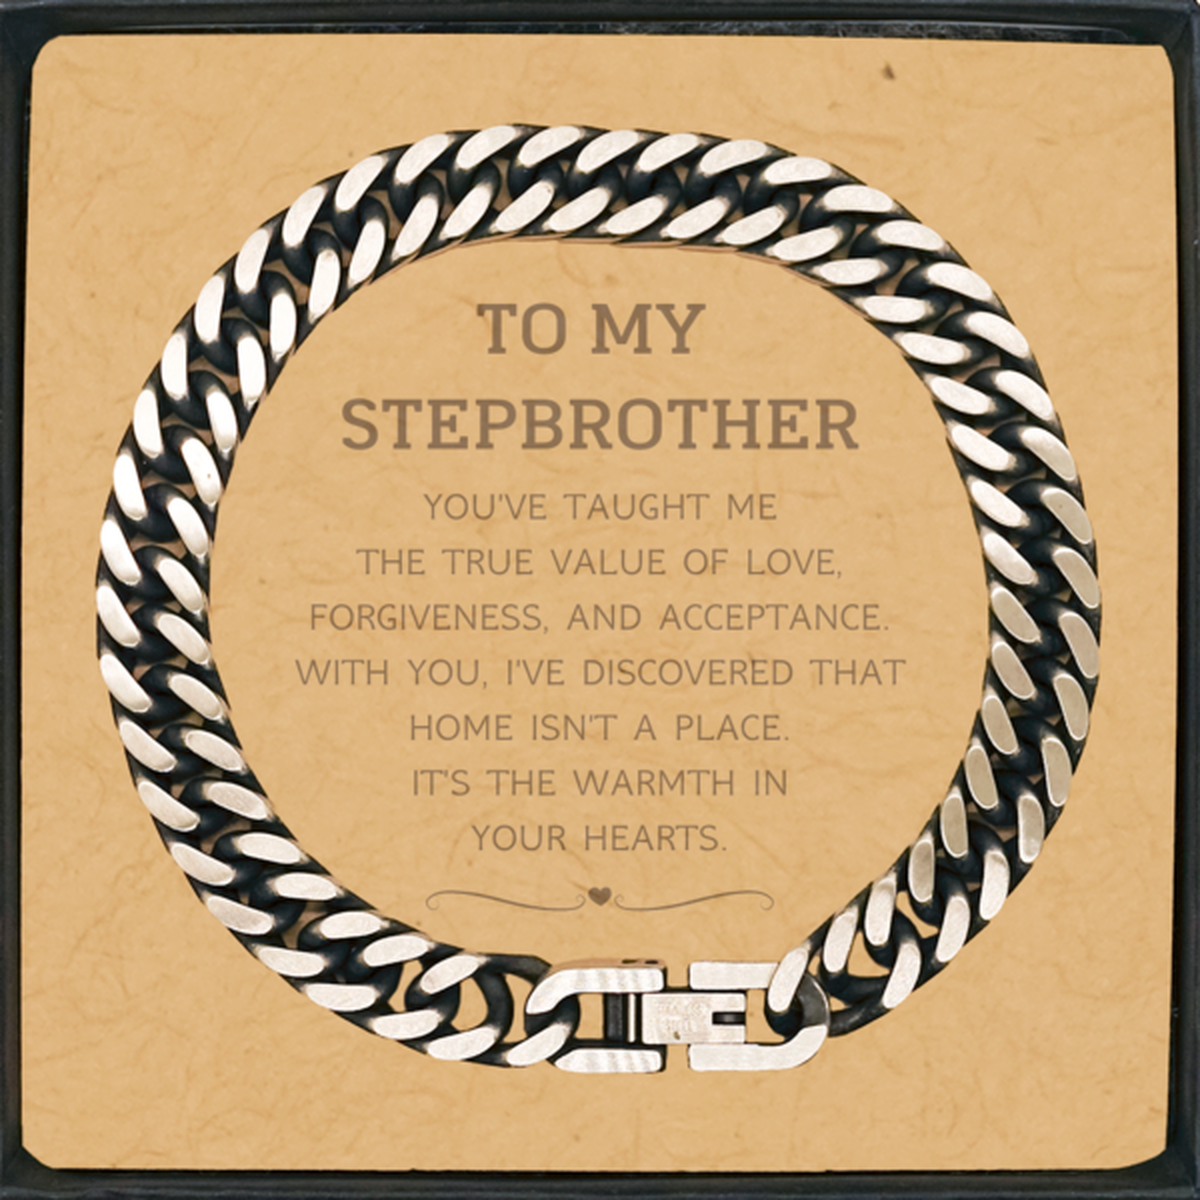 To My Stepbrother Gifts, You've taught me the true value of love, Thank You Gifts For Stepbrother, Birthday Cuban Link Chain Bracelet For Stepbrother